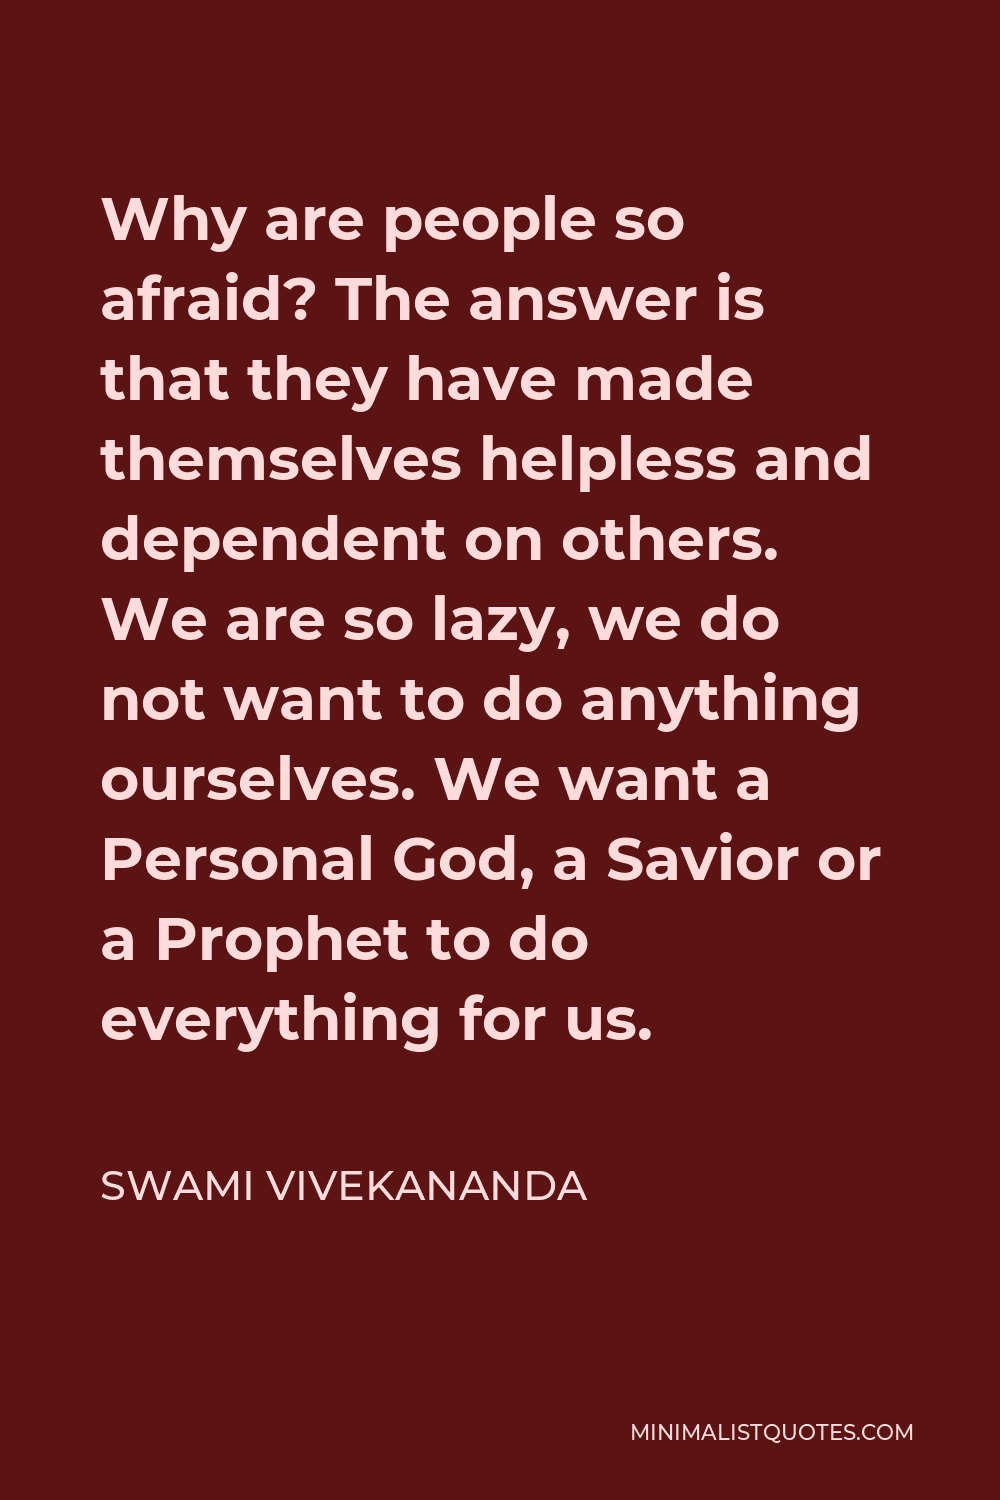 Swami Vivekananda Quote - Why are people so afraid? The answer is that they have made themselves helpless and dependent on others. We are so lazy, we do not want to do anything ourselves. We want a Personal God, a Savior or a Prophet to do everything for us.